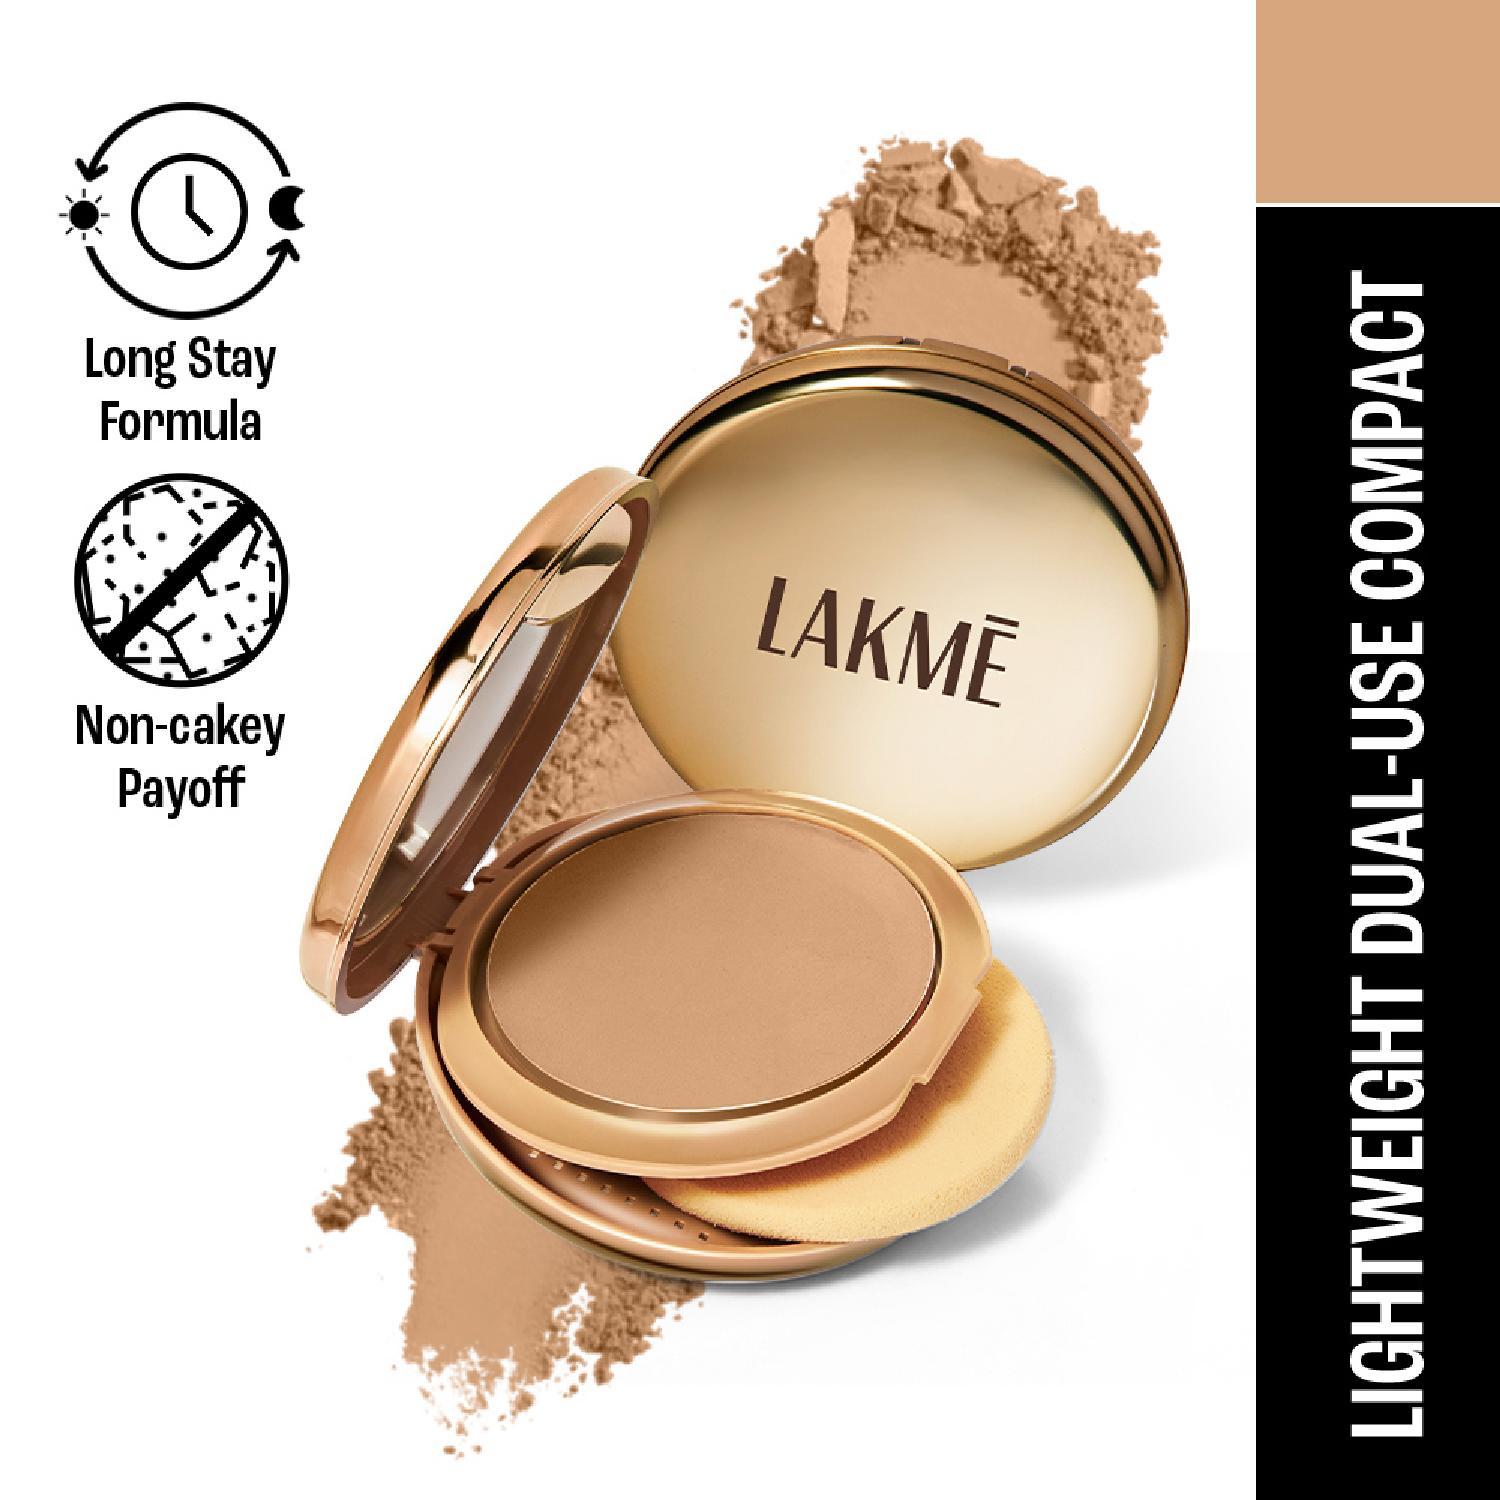 Lakme | Lakme 9 to 5 Unreal Dual Cover Pressed Powder, 2 In 1 Compact + Foundation, 20 Nude (9g)